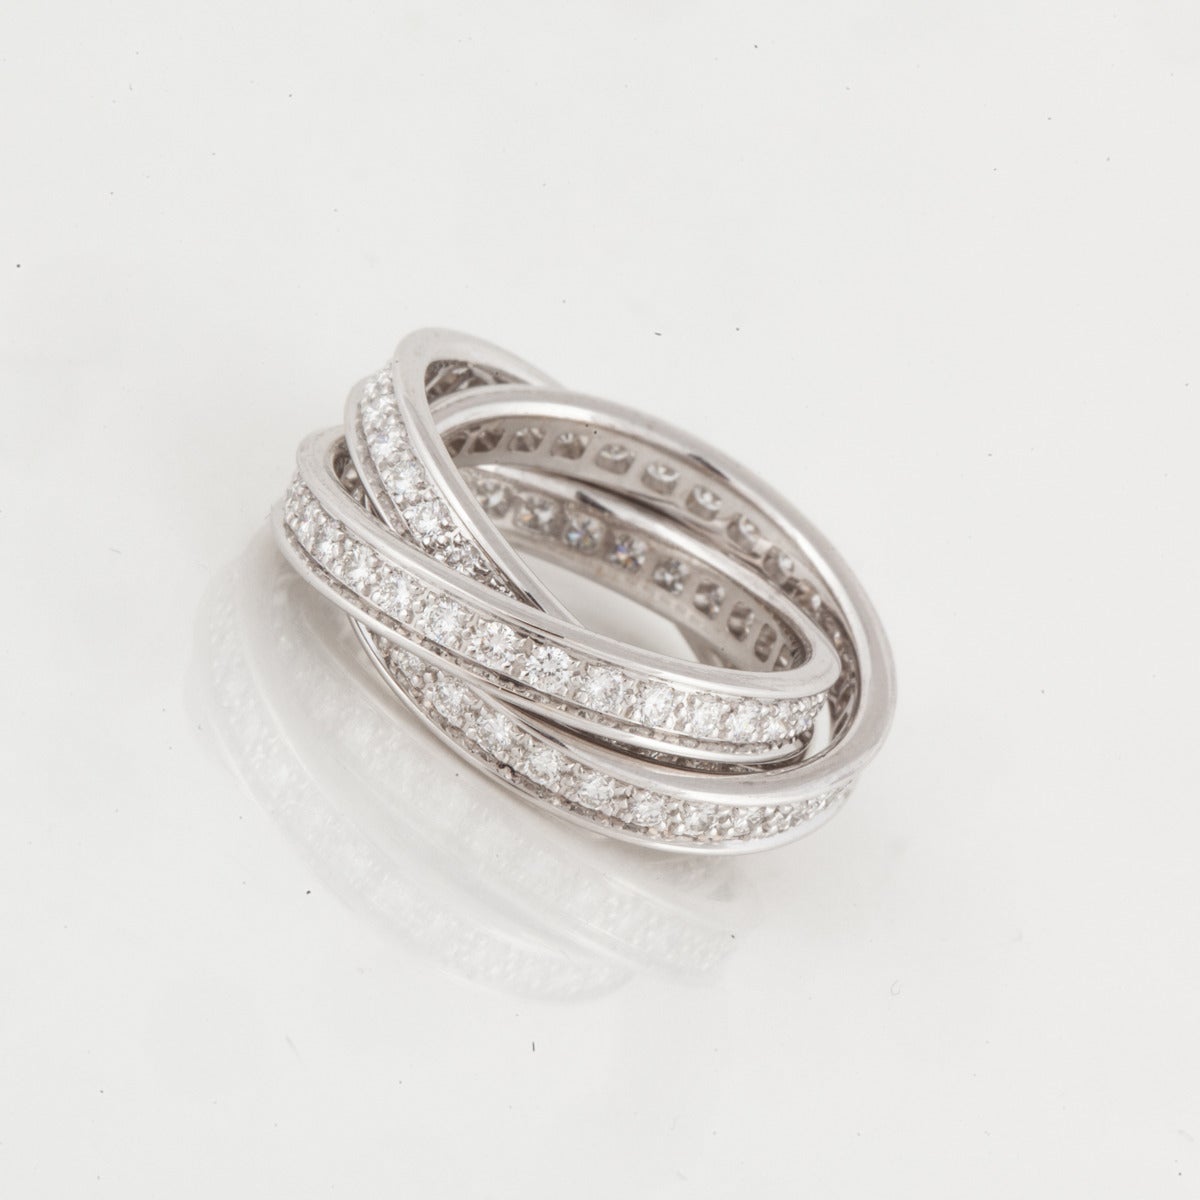 Cartier Trinity ring in 18K white gold with diamonds.  The ring features ninety three (93) round diamonds totaling 2.25 carats,  F-G color and VVS-VS clarity.  The ring is a European size 51 or US 5 1/2.  It is marked on the outside edge 